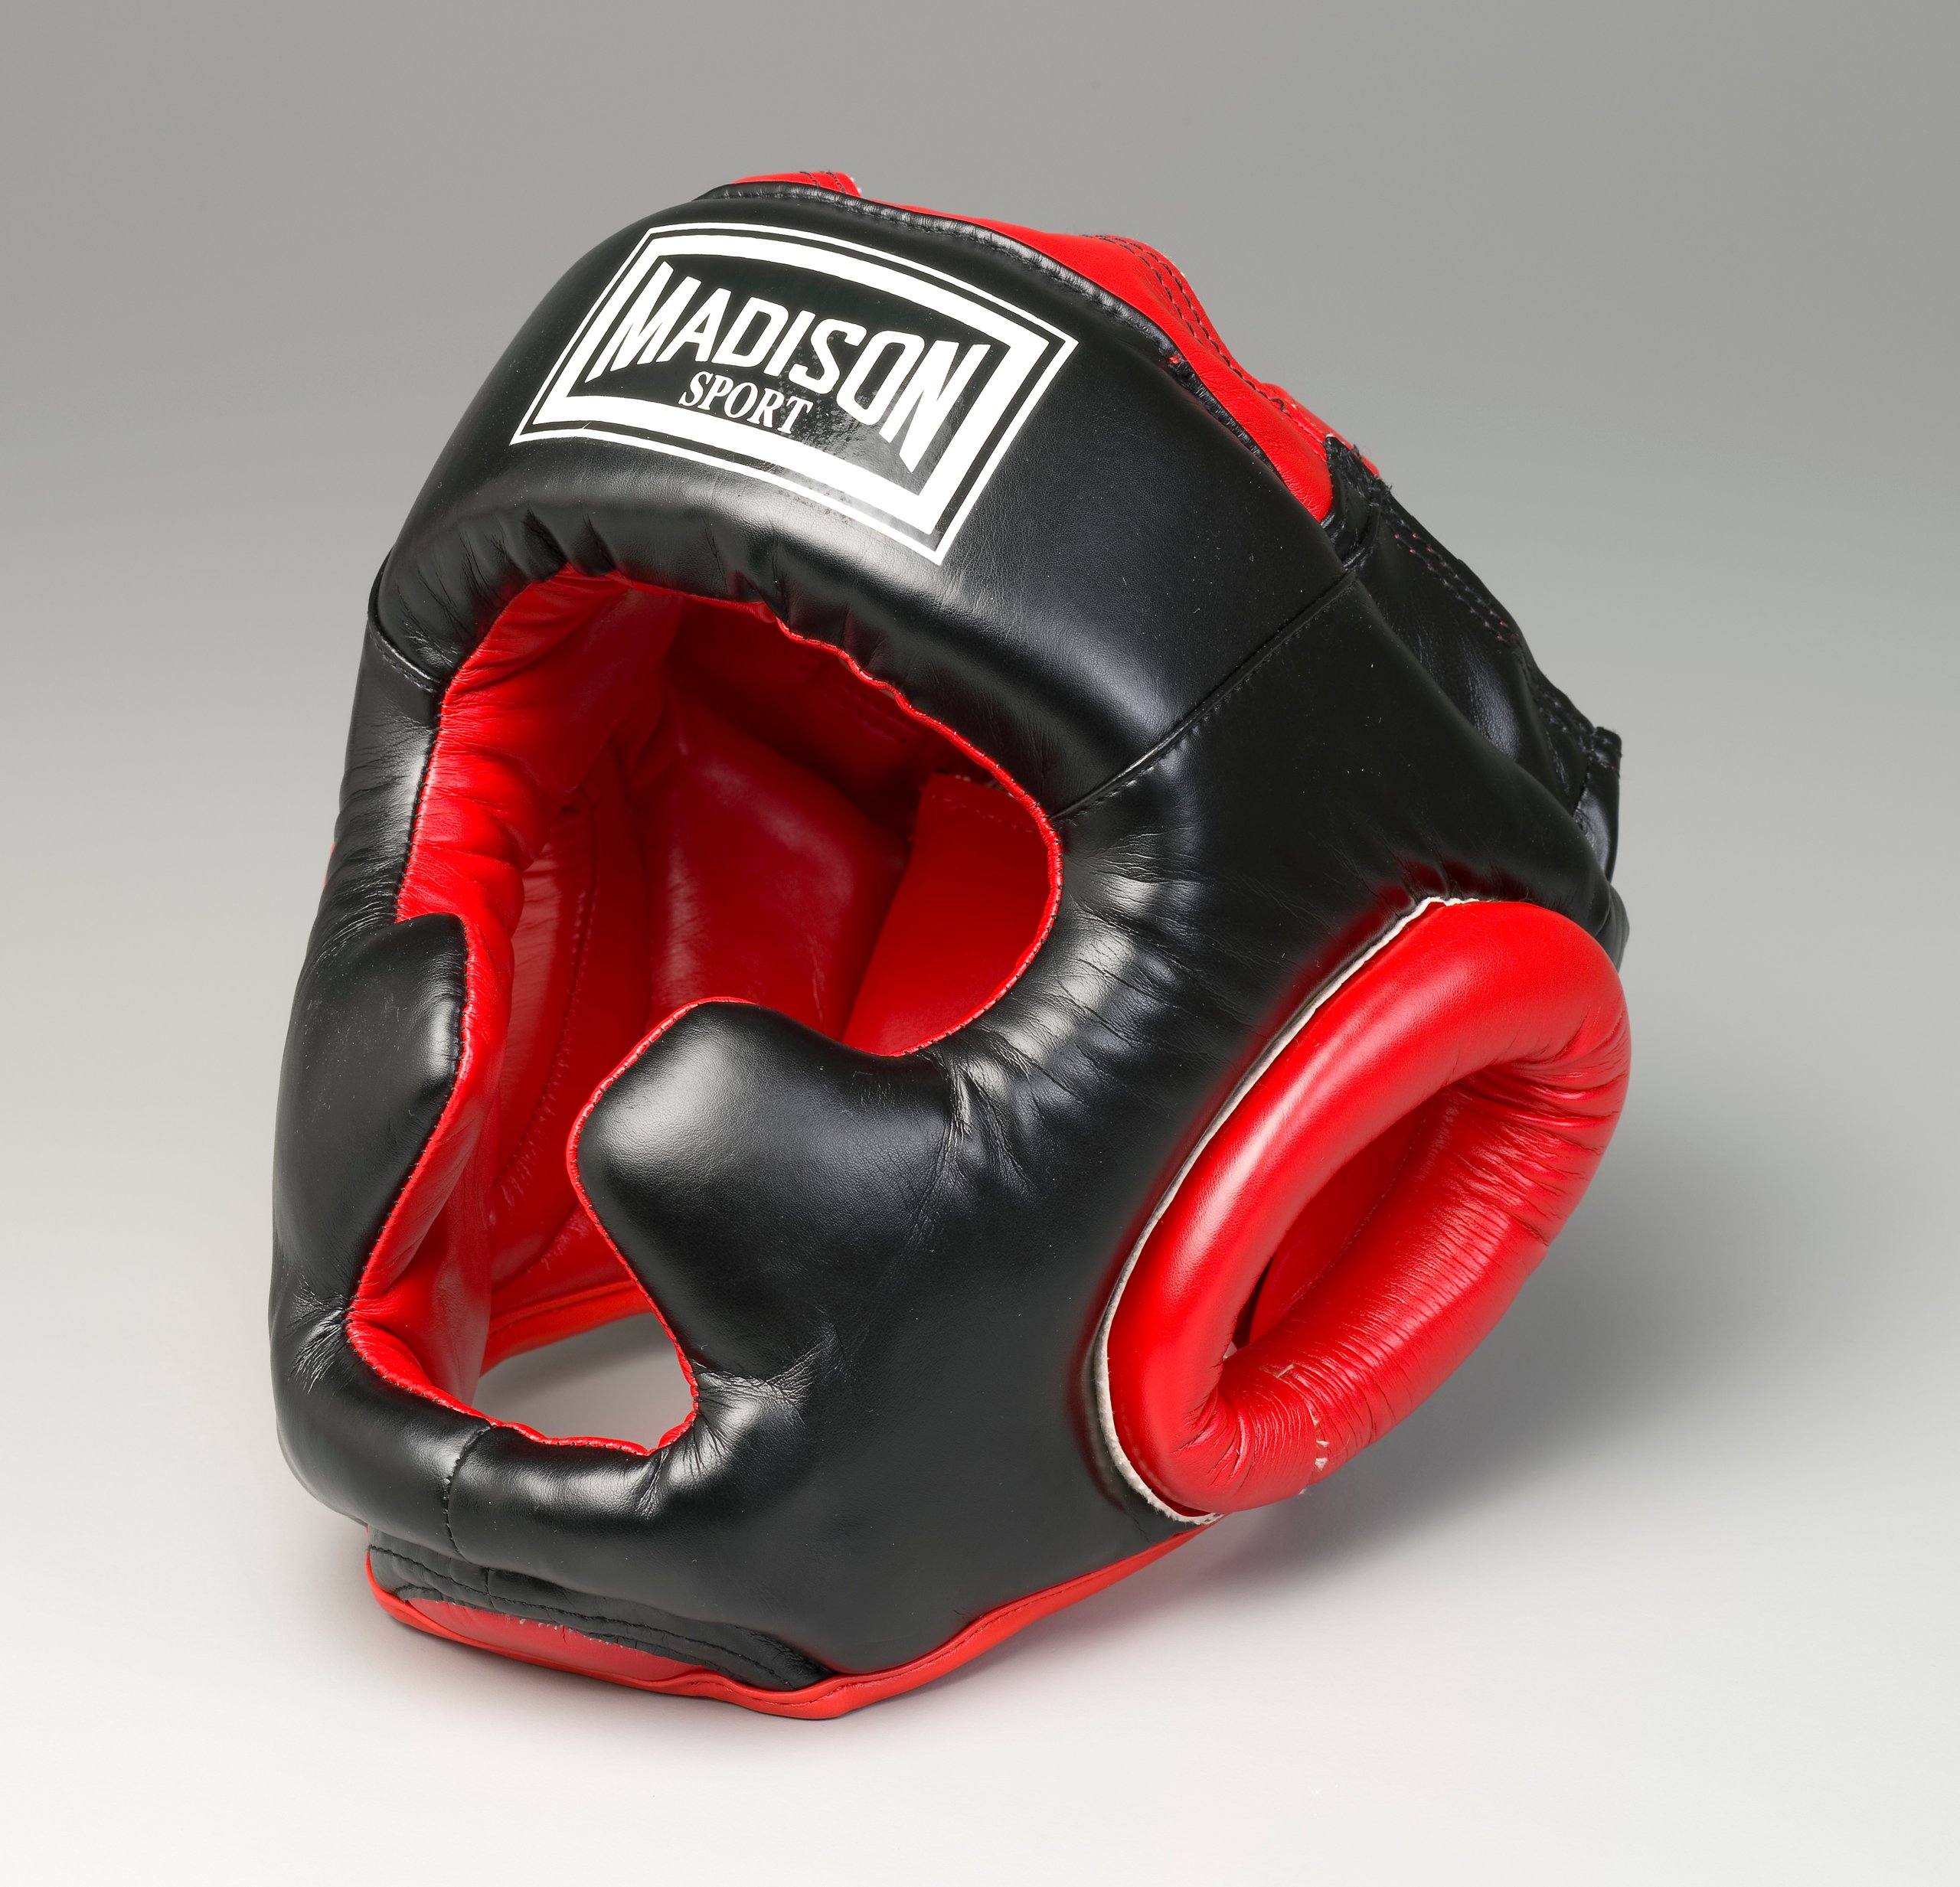 Boxing headguard and packaging